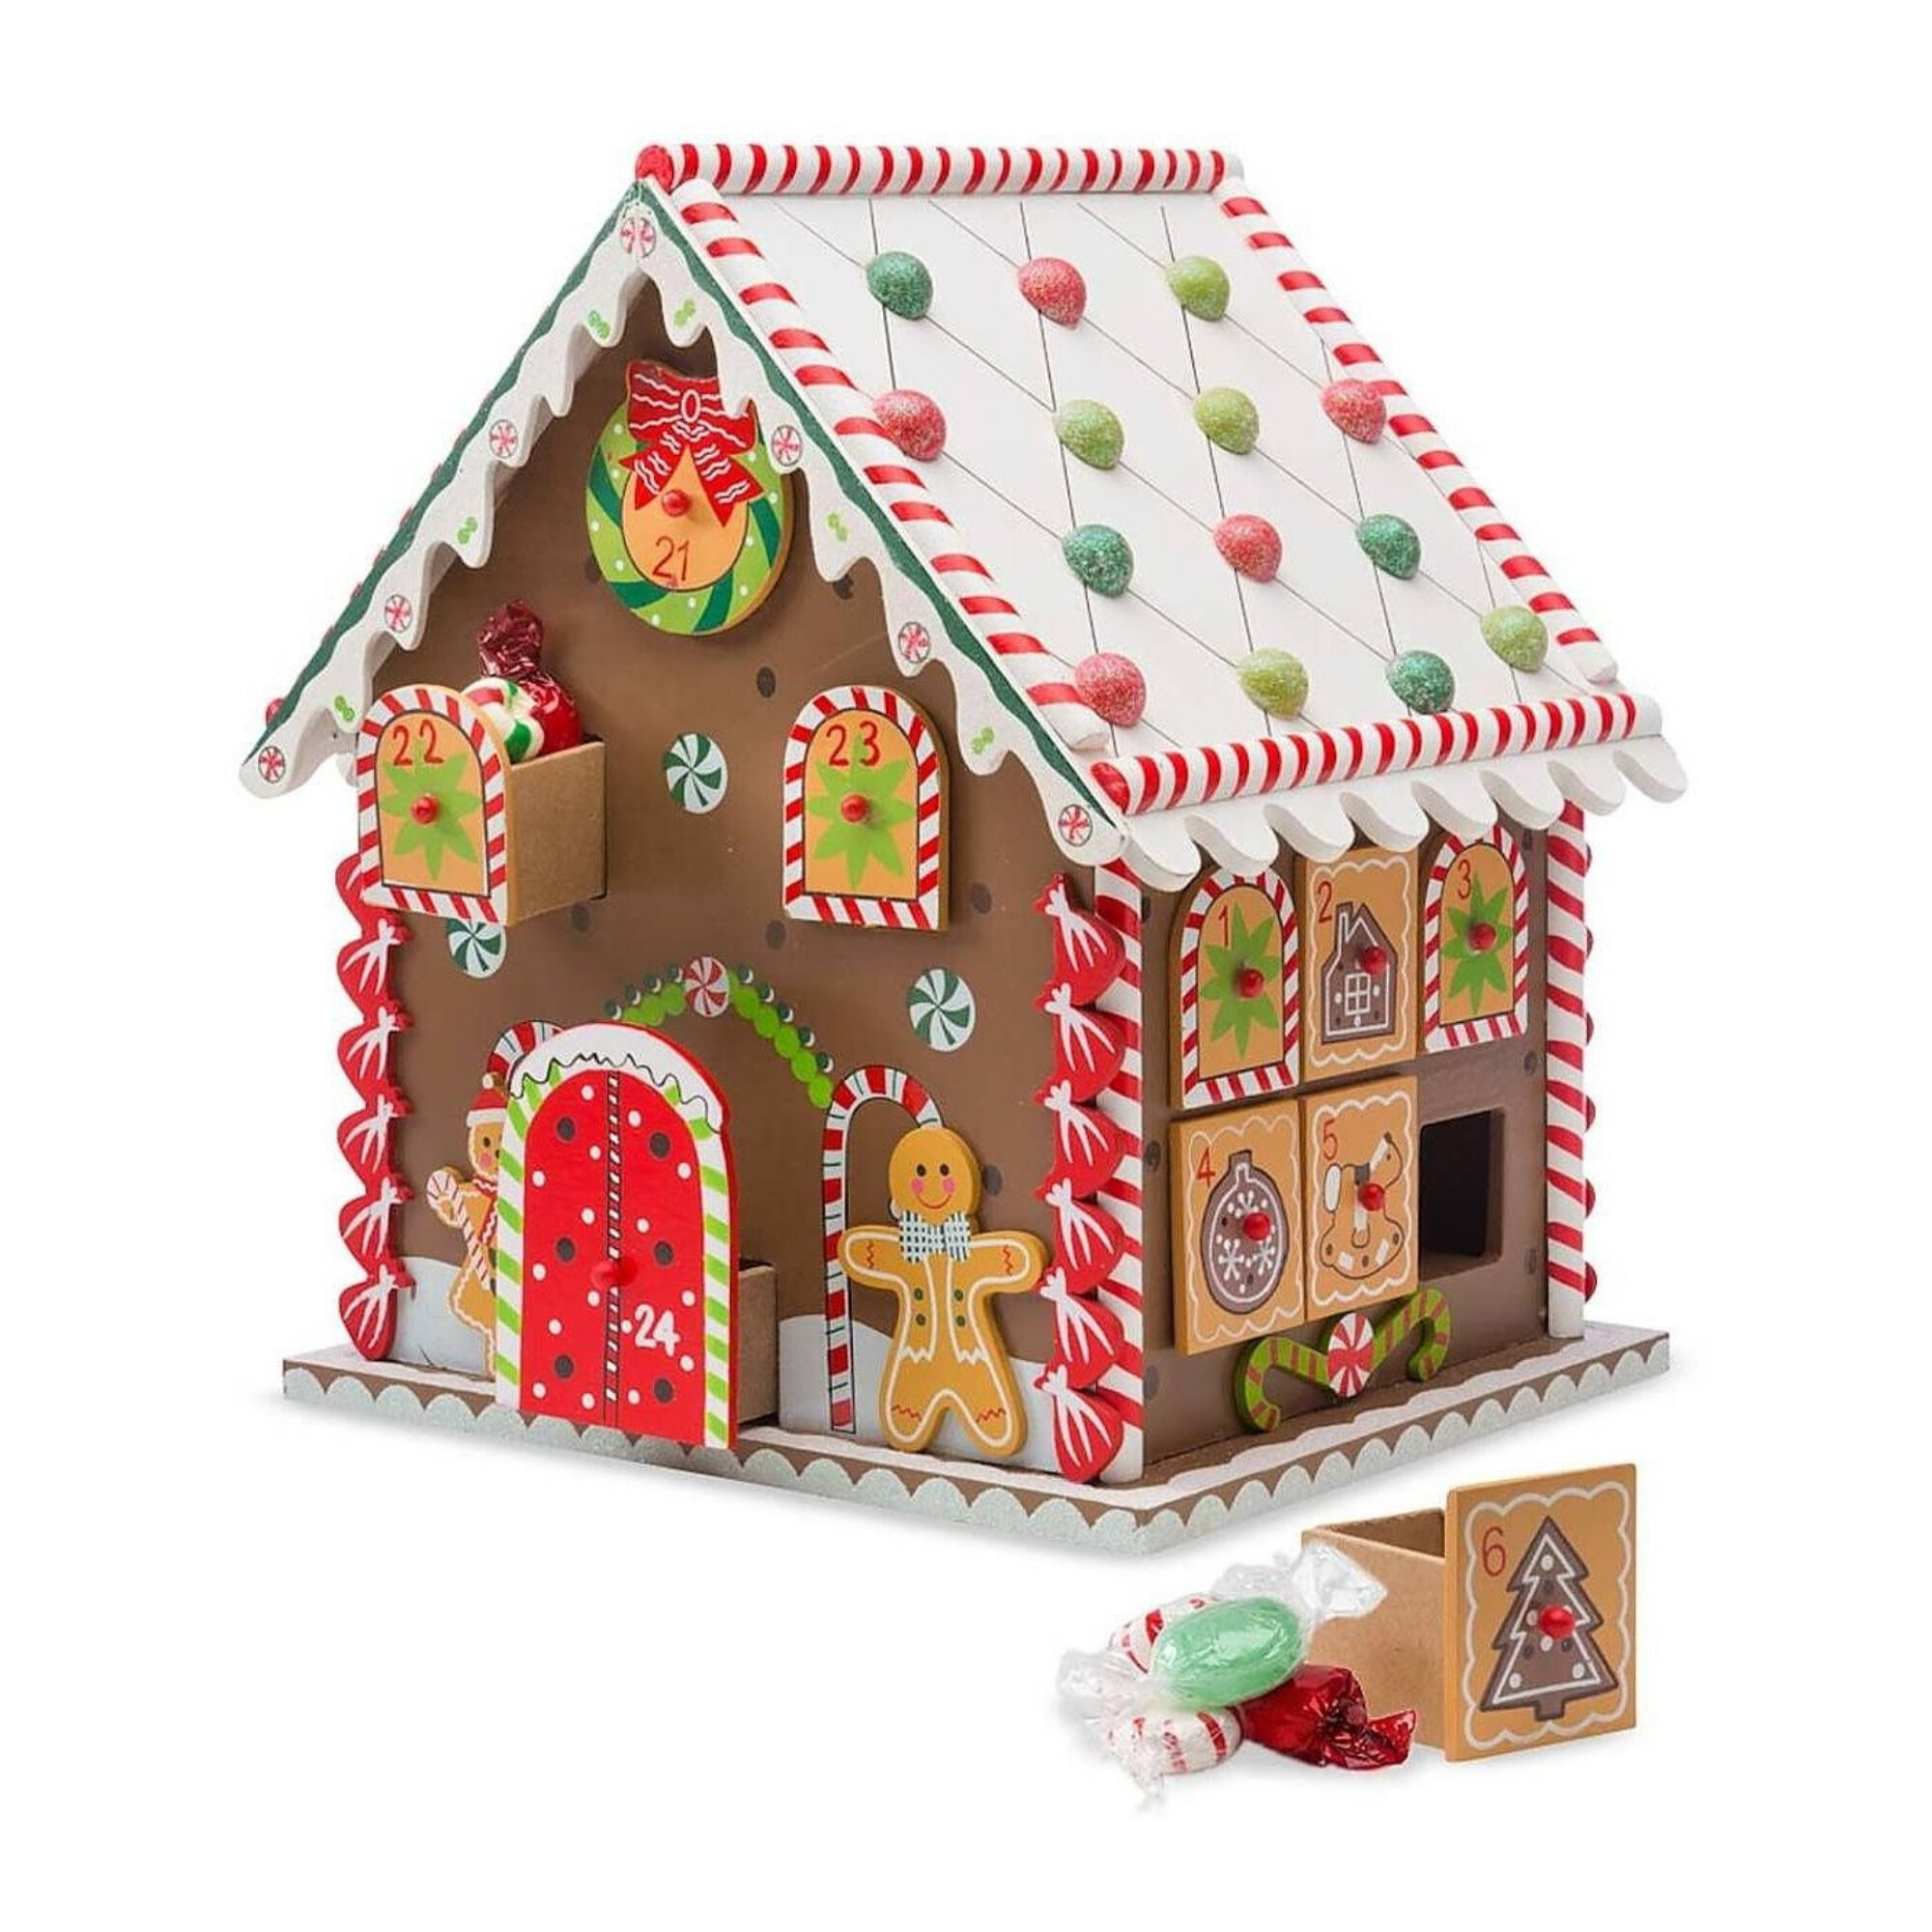 Wooden Gingerbread House Advent, $39.96 